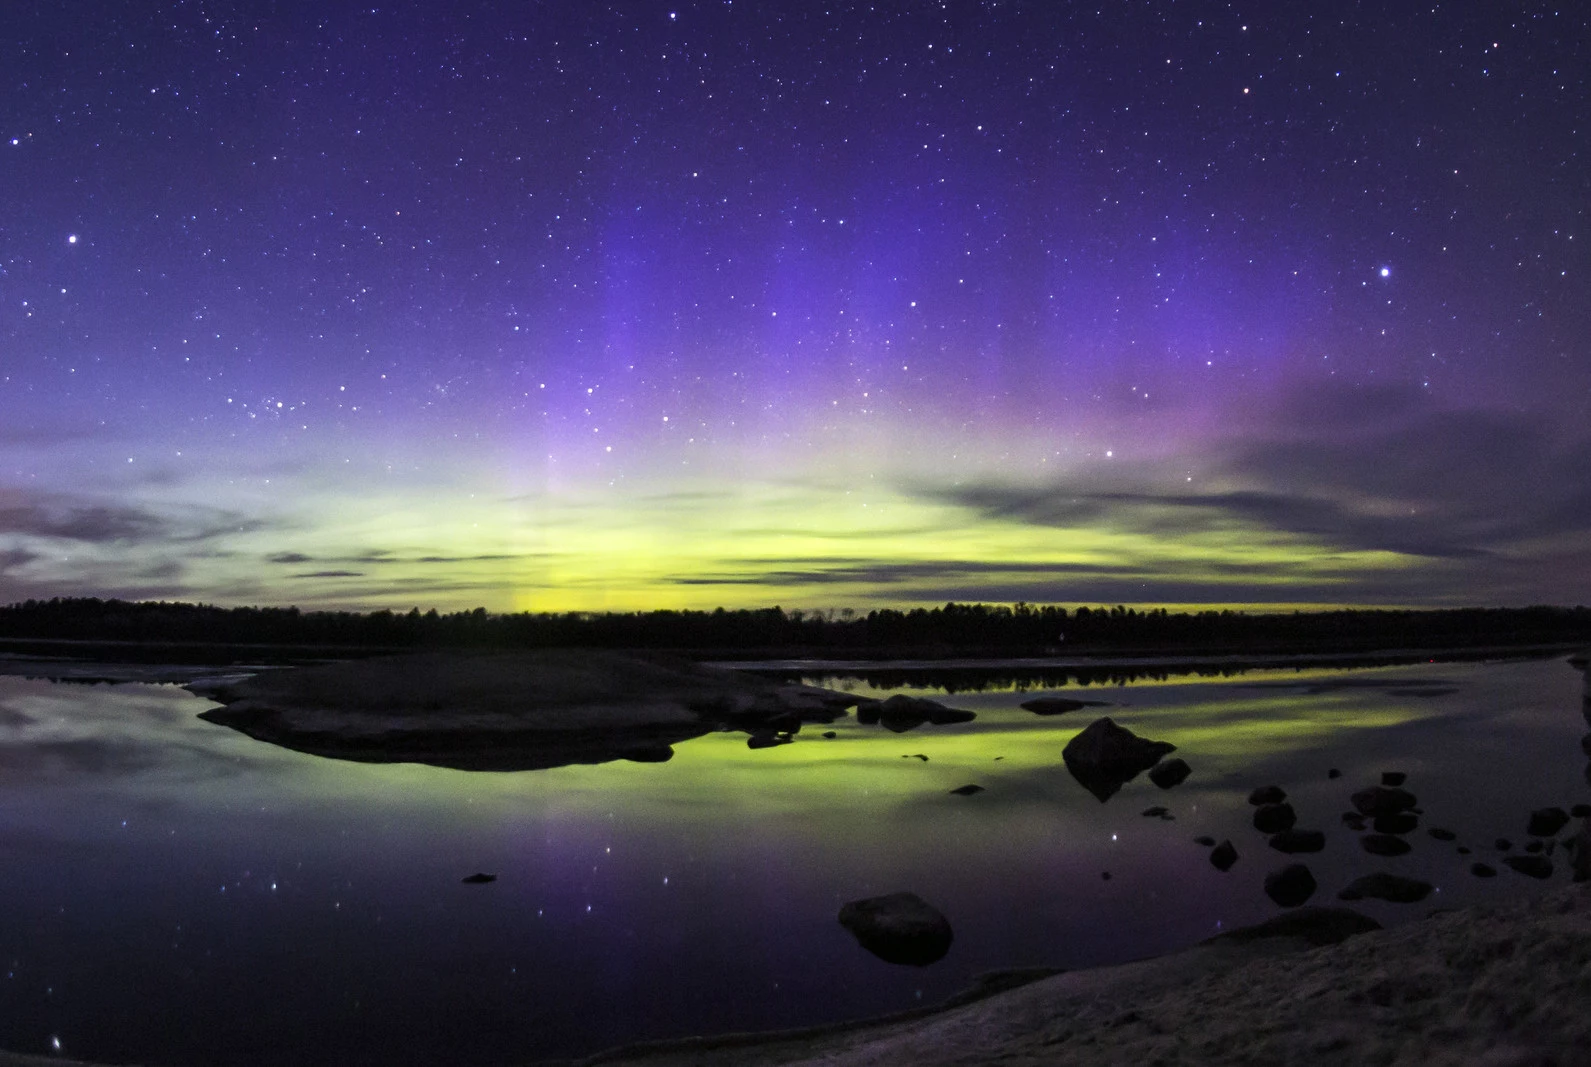 Rare Chance to See the Magical Northern Lights in New England